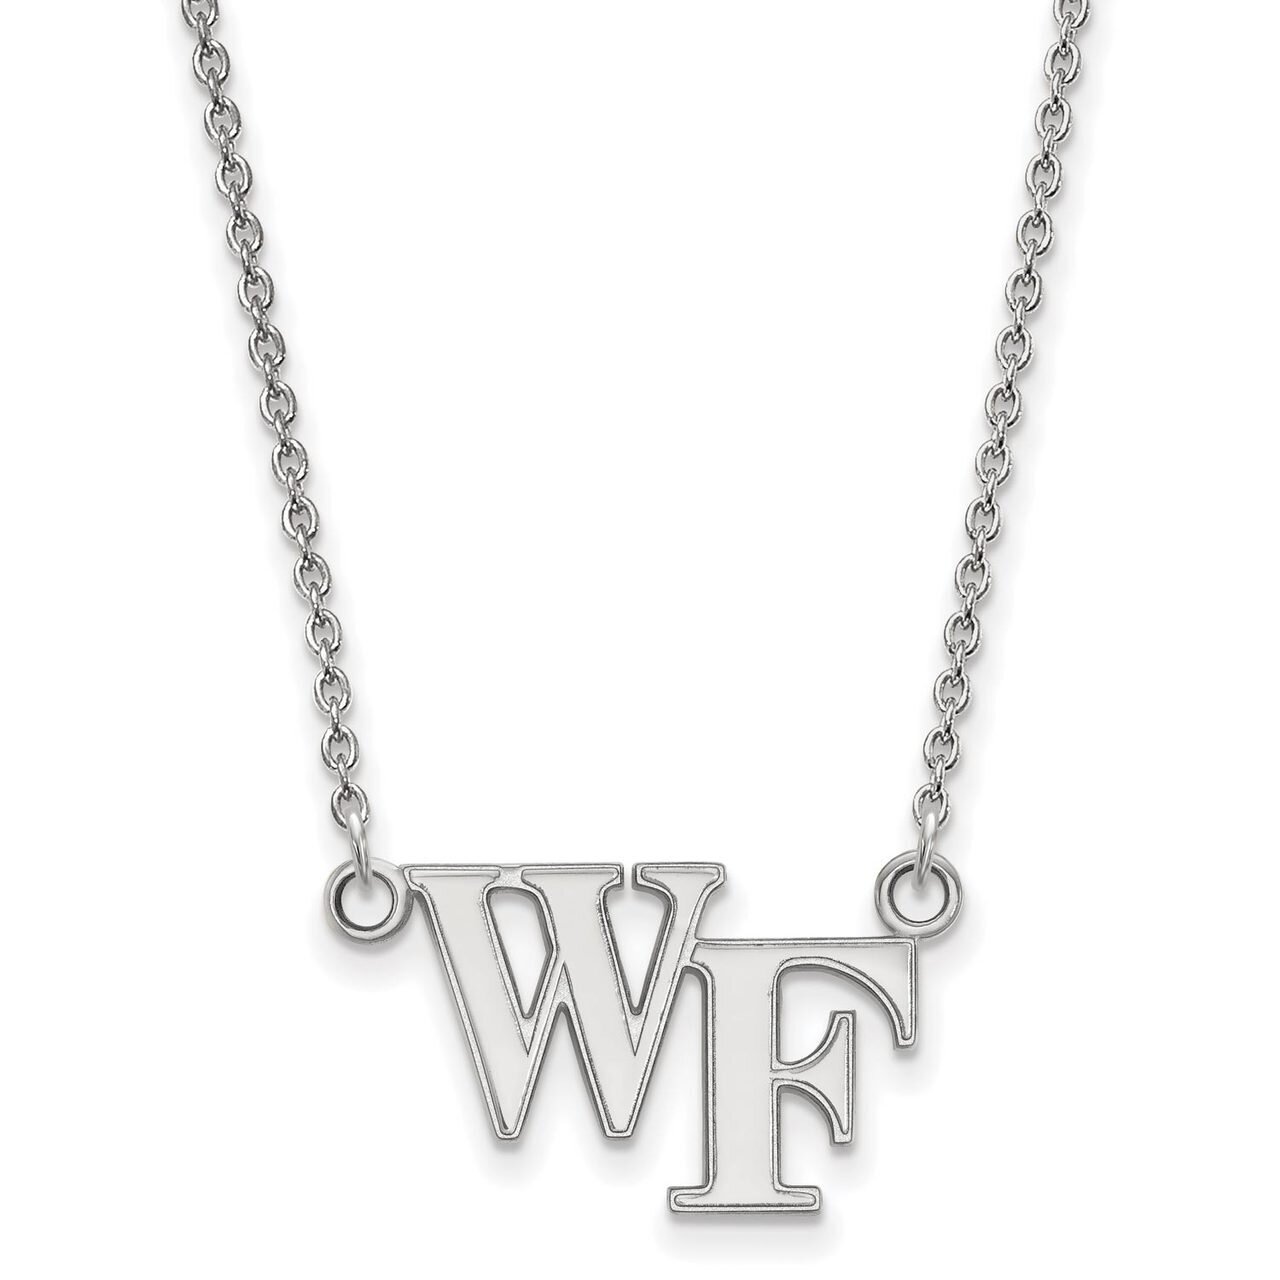 Wake Forest University Small Pendant with Chain Necklace 14k White Gold 4W009WFU-18